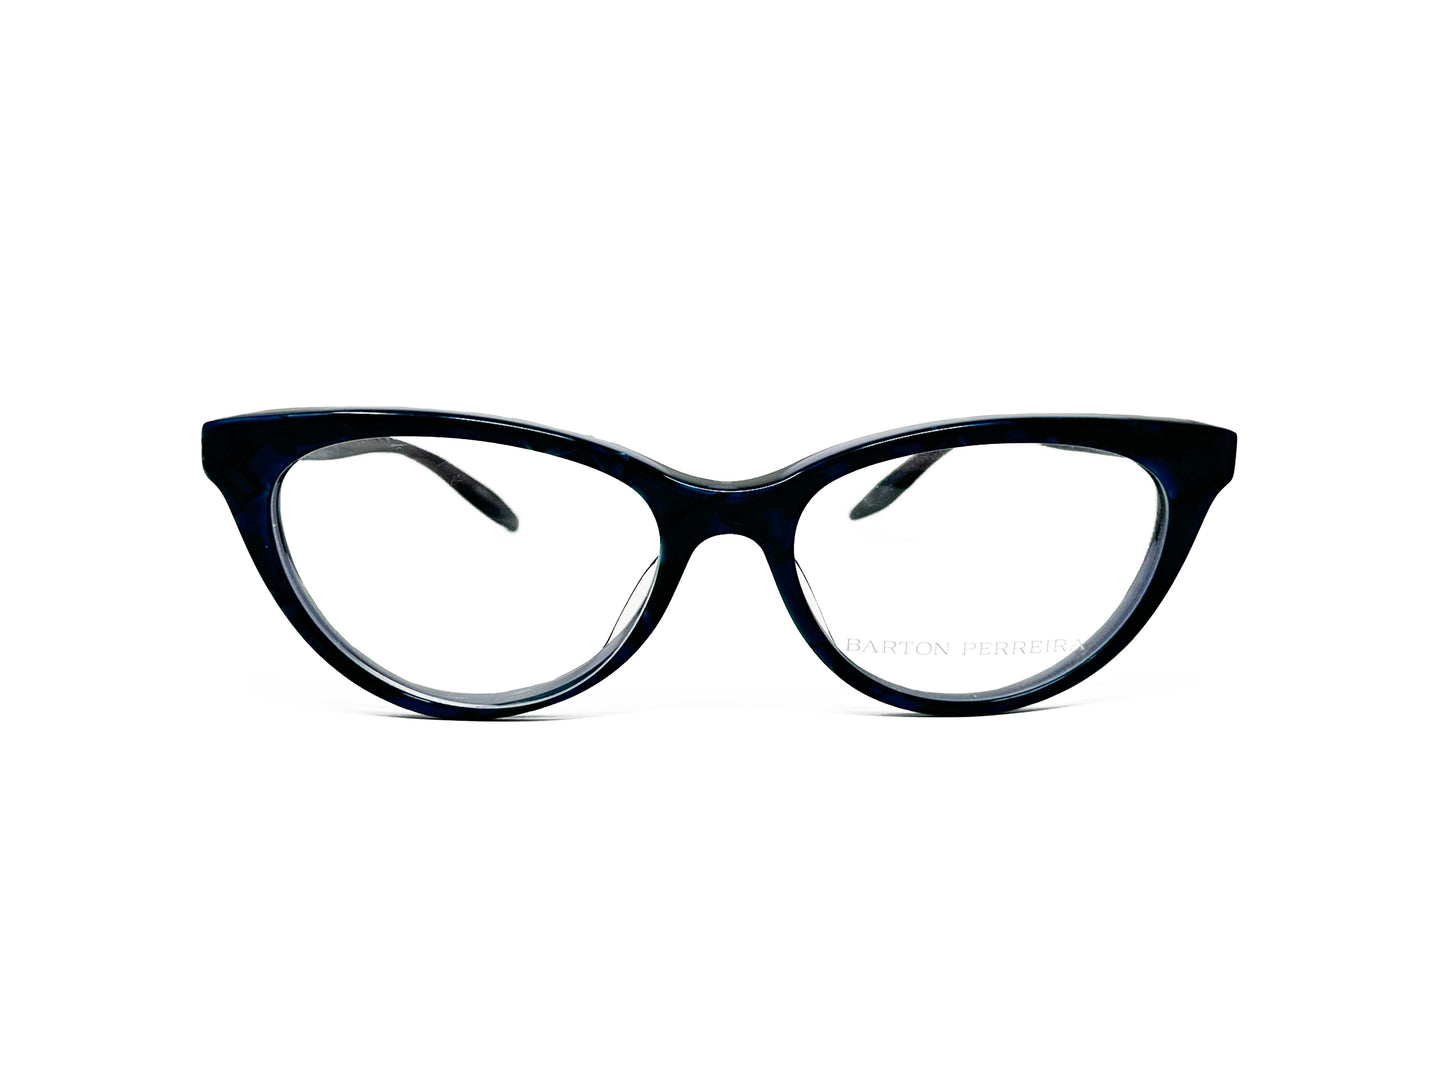 Barton Perreira rounded cat-eye optical frame. Model: Tippi. Color: BLV - Black with blue marbling on temples. Front view. 